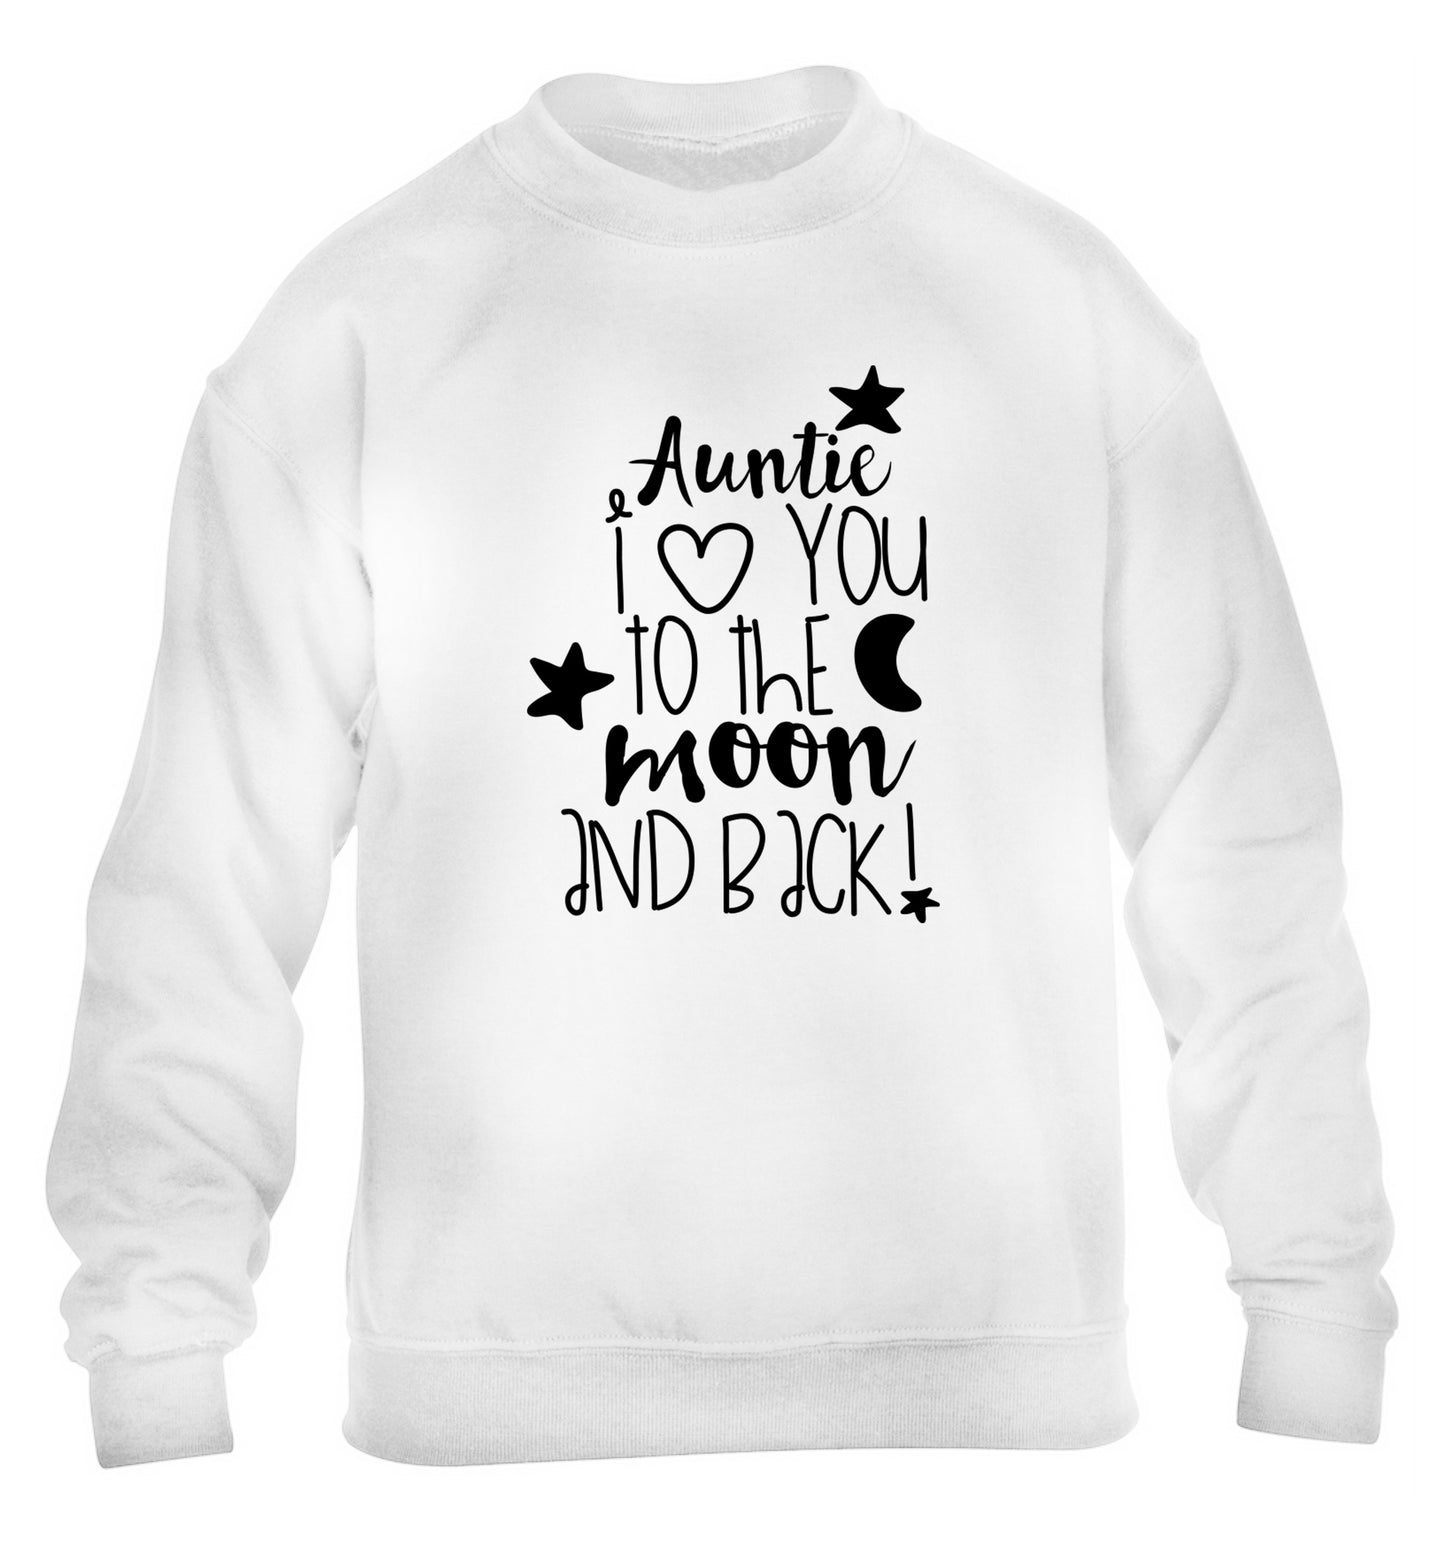 Auntie I love you to the moon and back children's white  sweater 12-14 Years